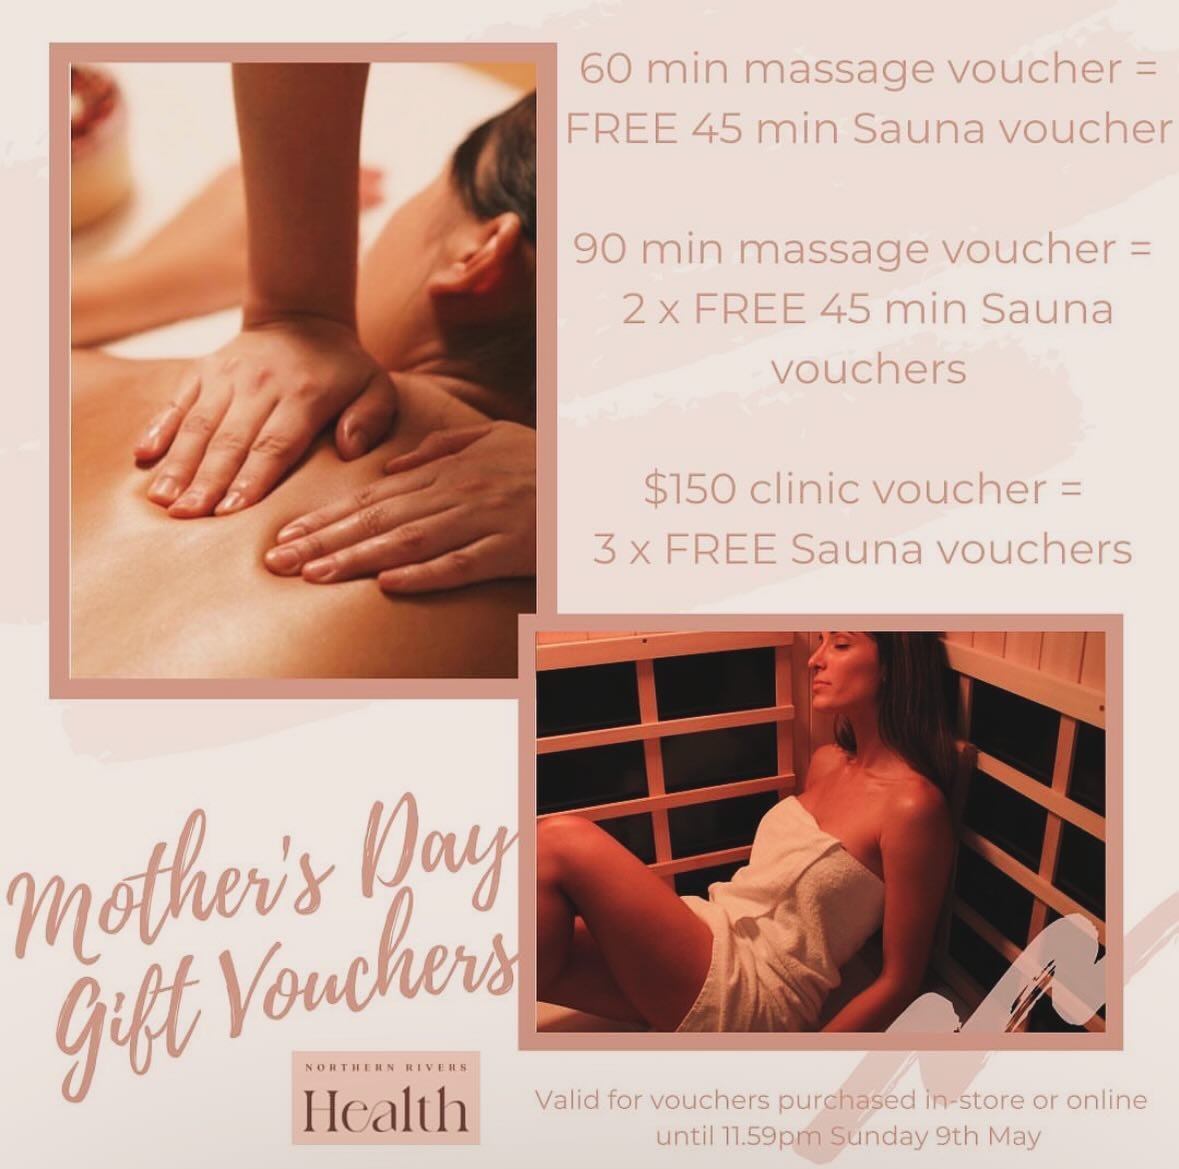 The Ultimate Mother&rsquo;s Day Present is here 🙌🏼🤍🌻
For Mother&rsquo;s Day this year we are giving away 45 minute infrared sauna vouchers 🔥🔥 with every massage voucher 💆&zwj;♀️ or $150 clinic voucher purchased. All you have to do is purchase 